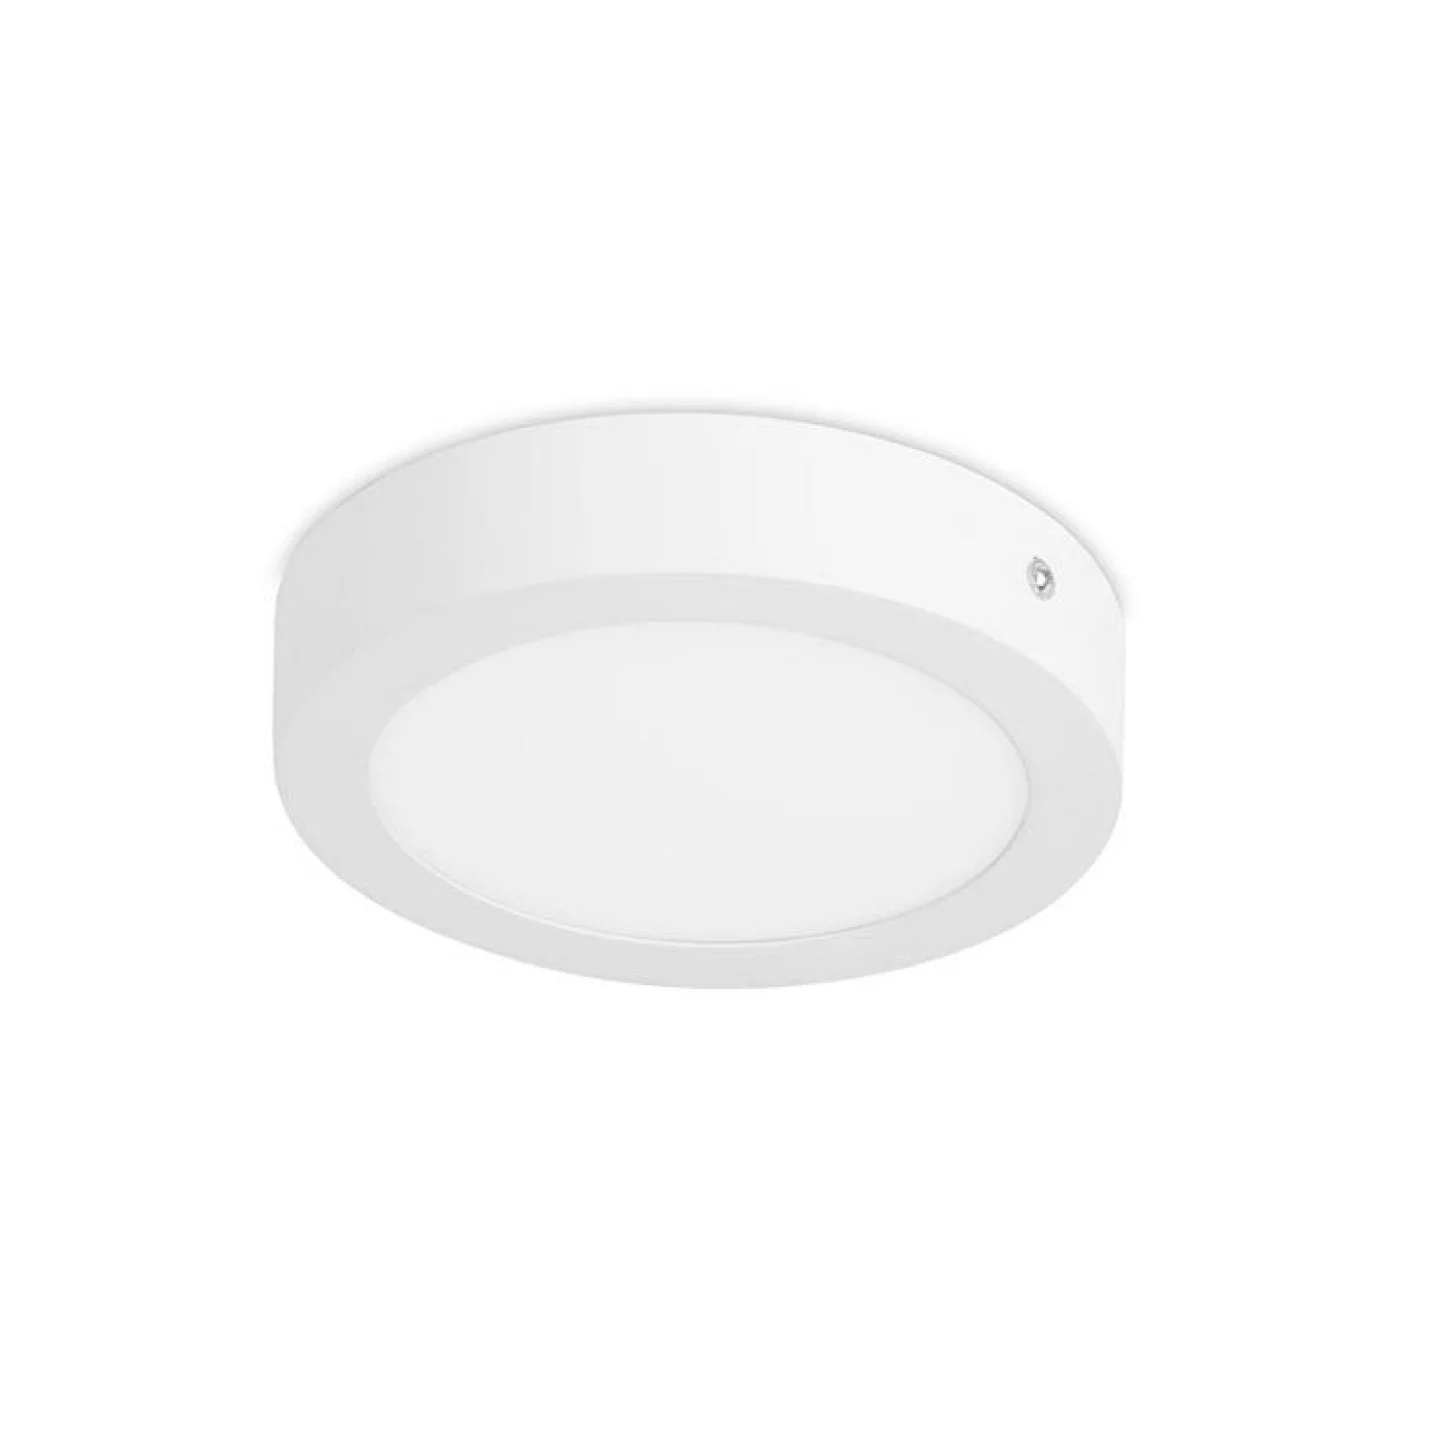 easy surface downlight.